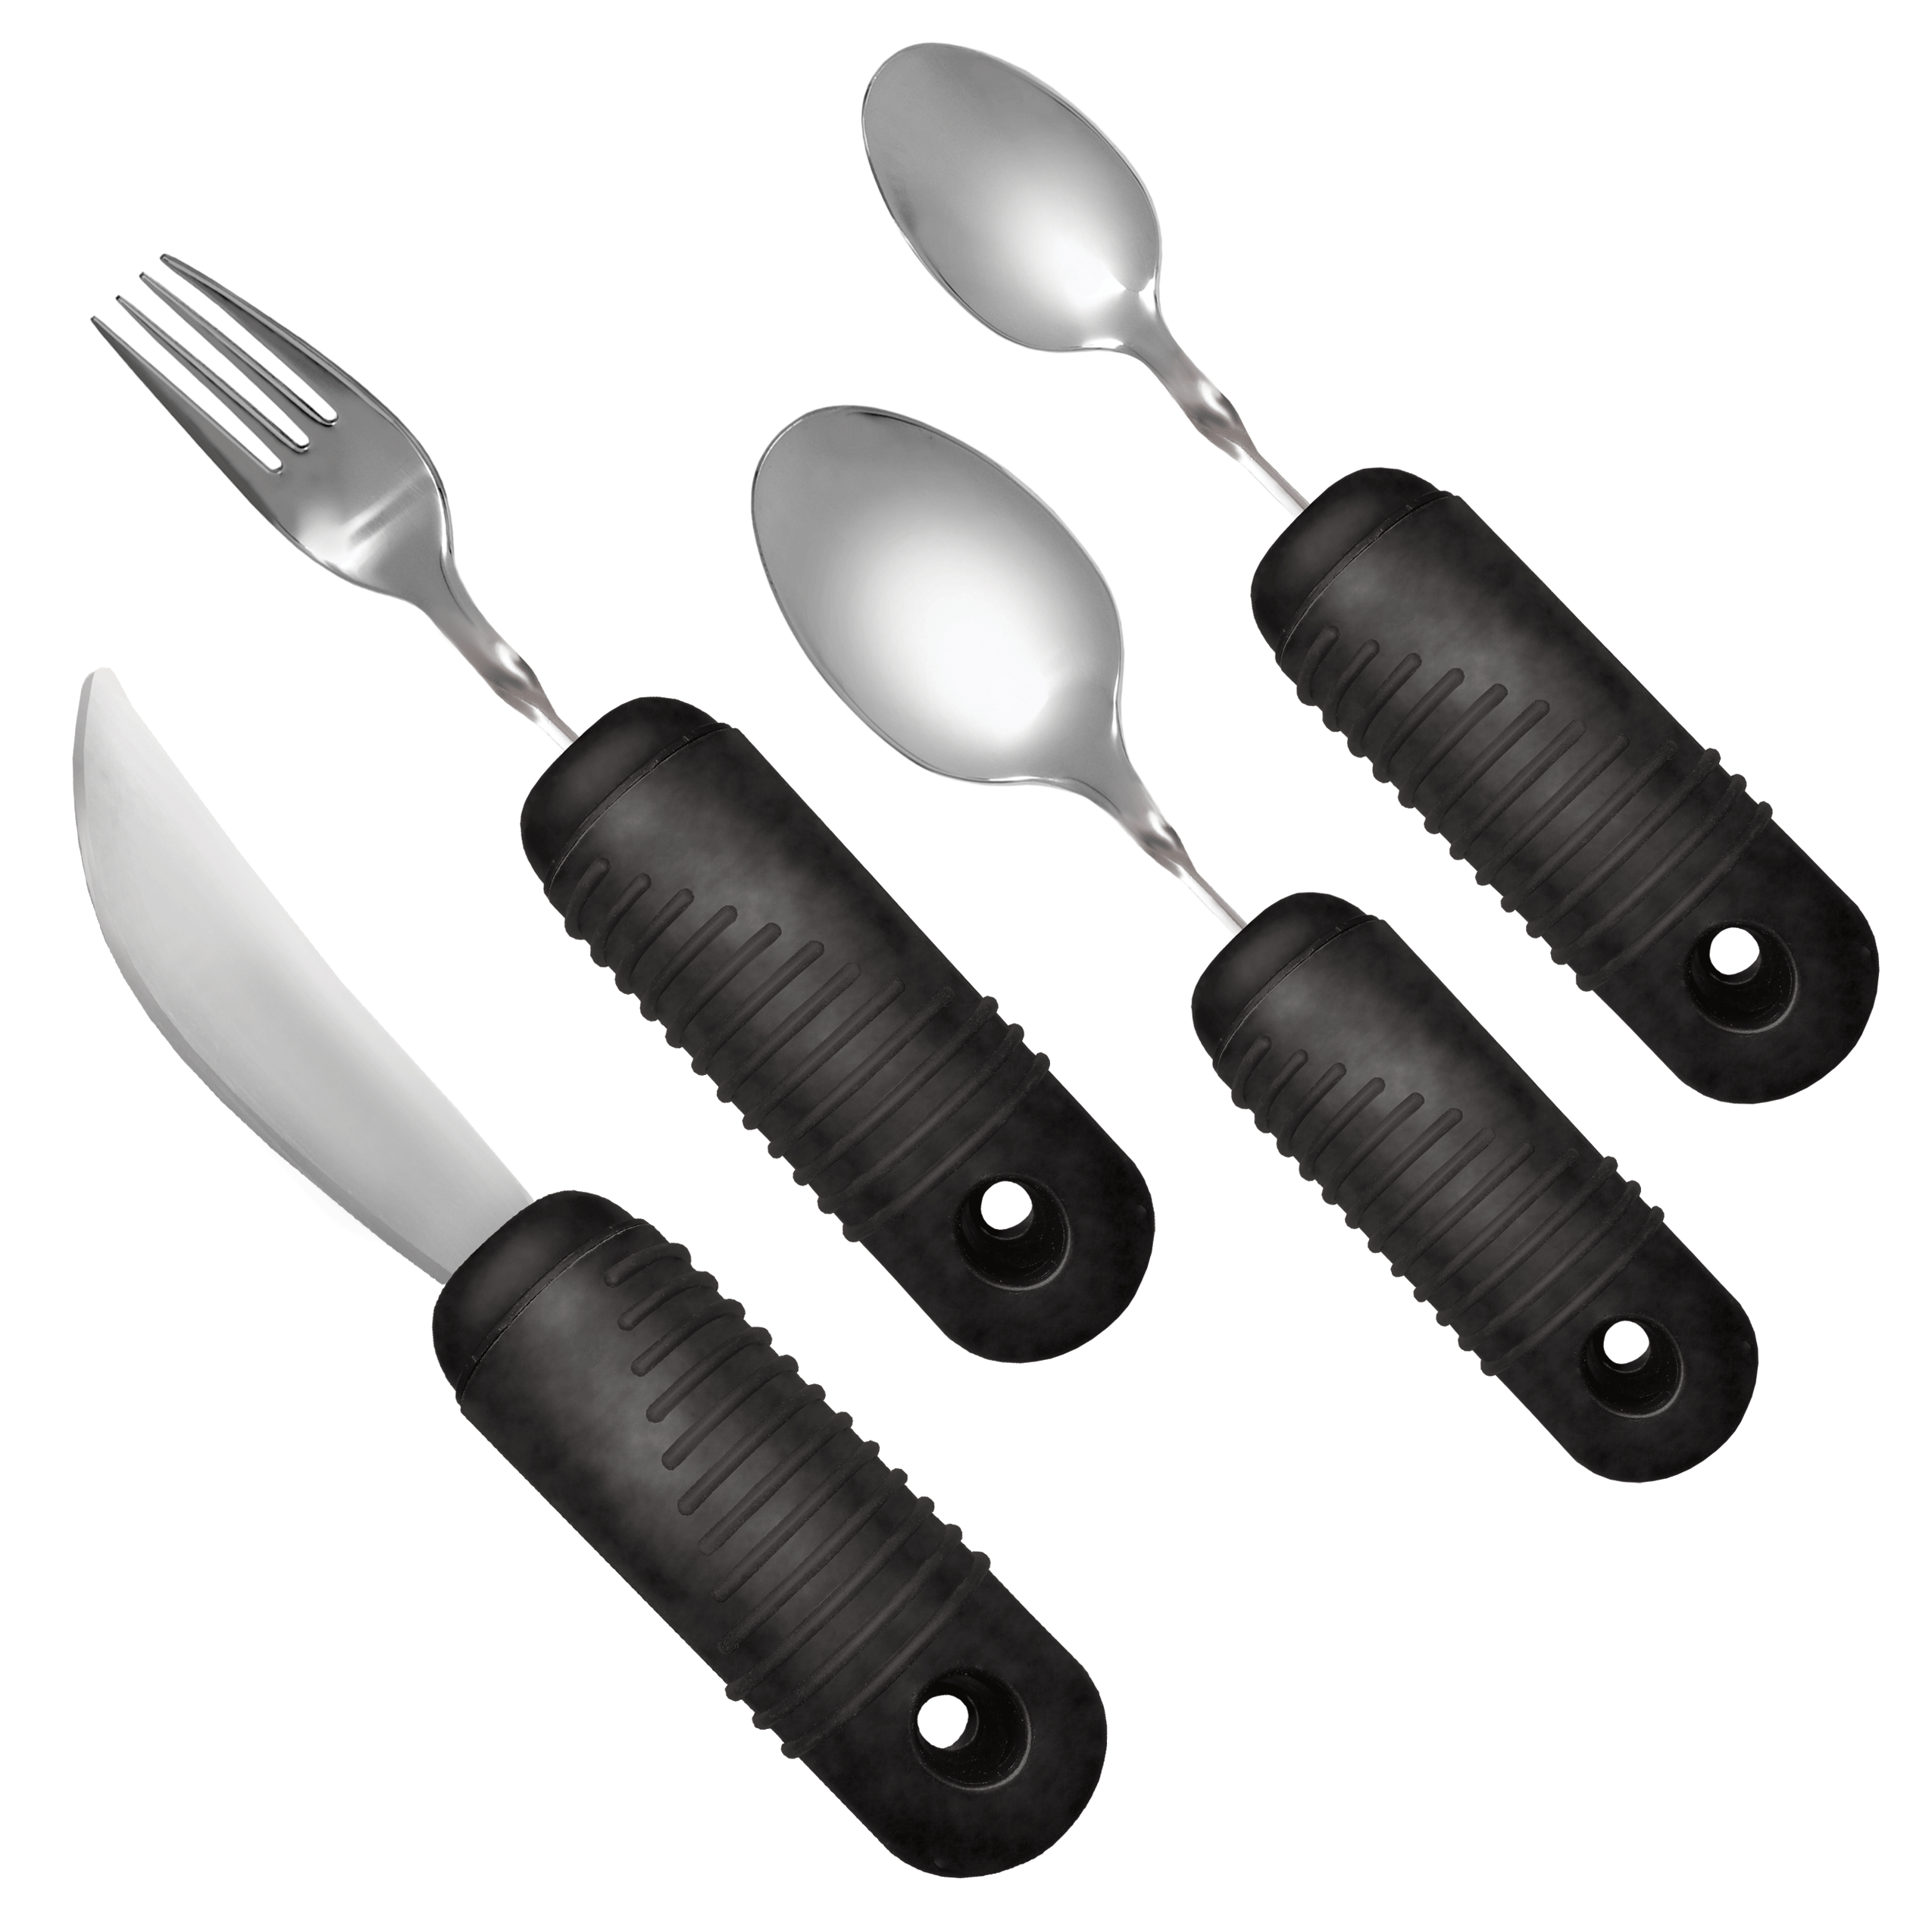 Adapted eating utensils including built-up handles on spoon and fork, a